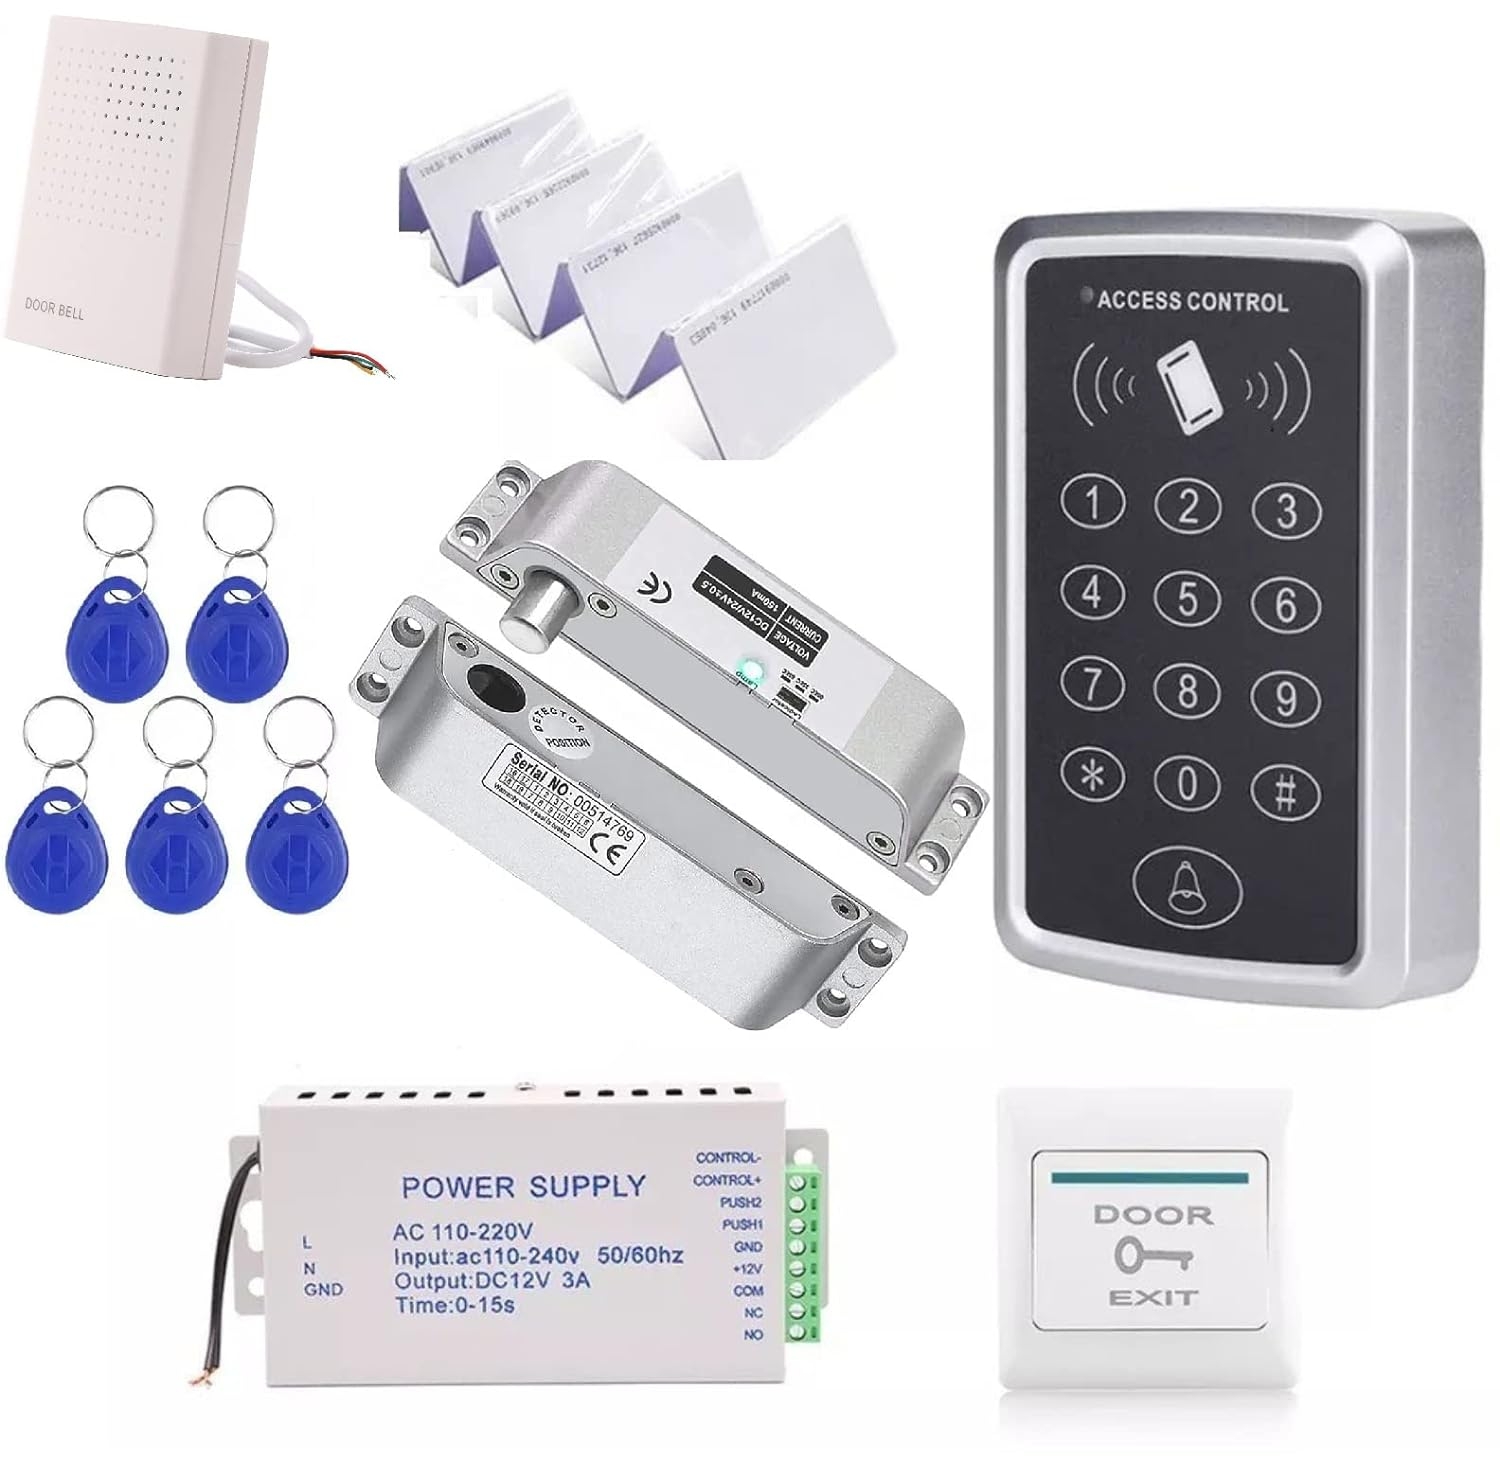 Jenix Open Surface Drop Bolt Lock Kit | Including RFID Access Control, Power Supply, Exit Button, Tag Full Set